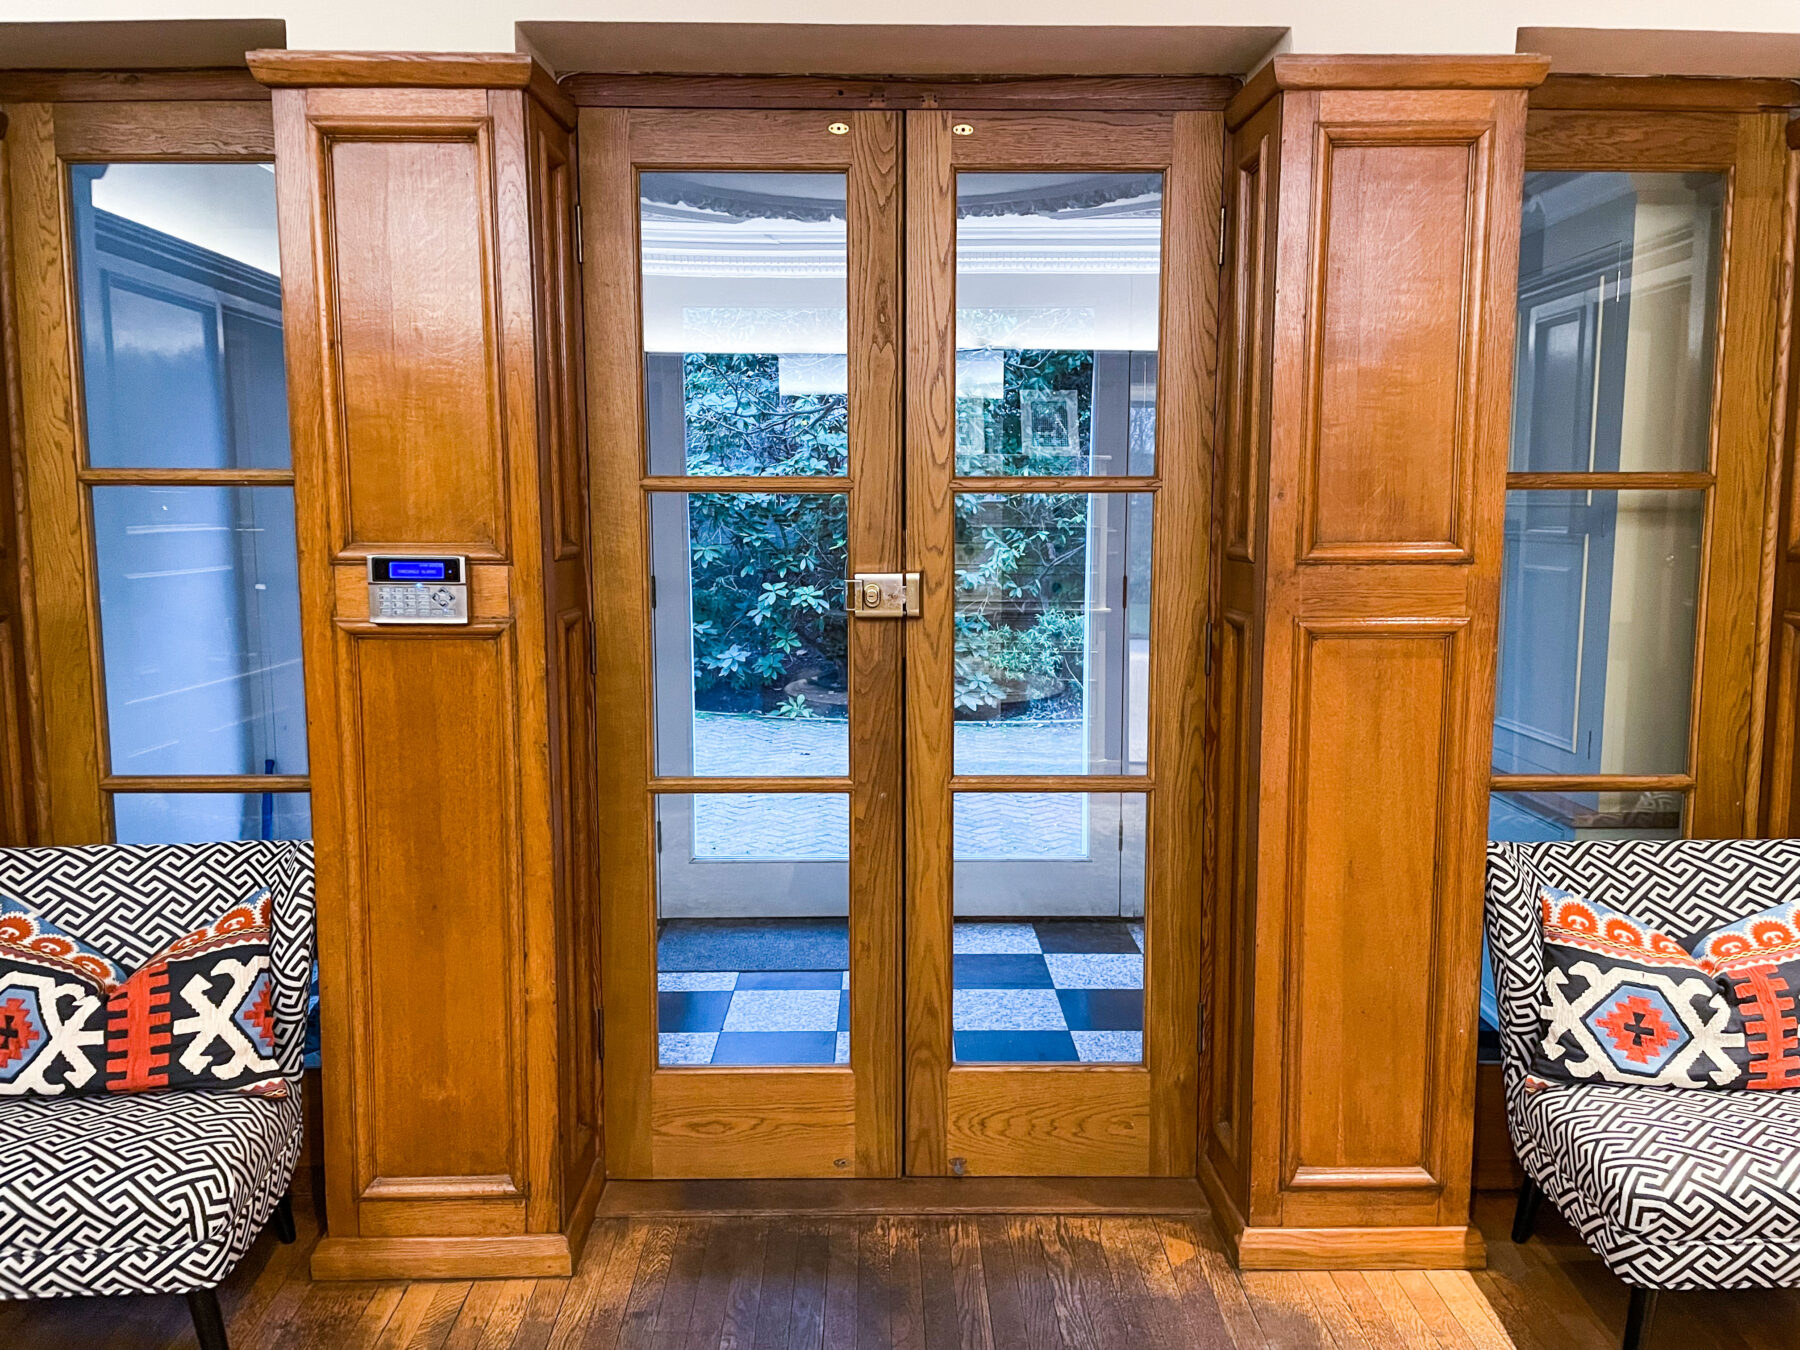 Entrance hall oak panelling 1930s large glass doors filming location hire lodge London 45